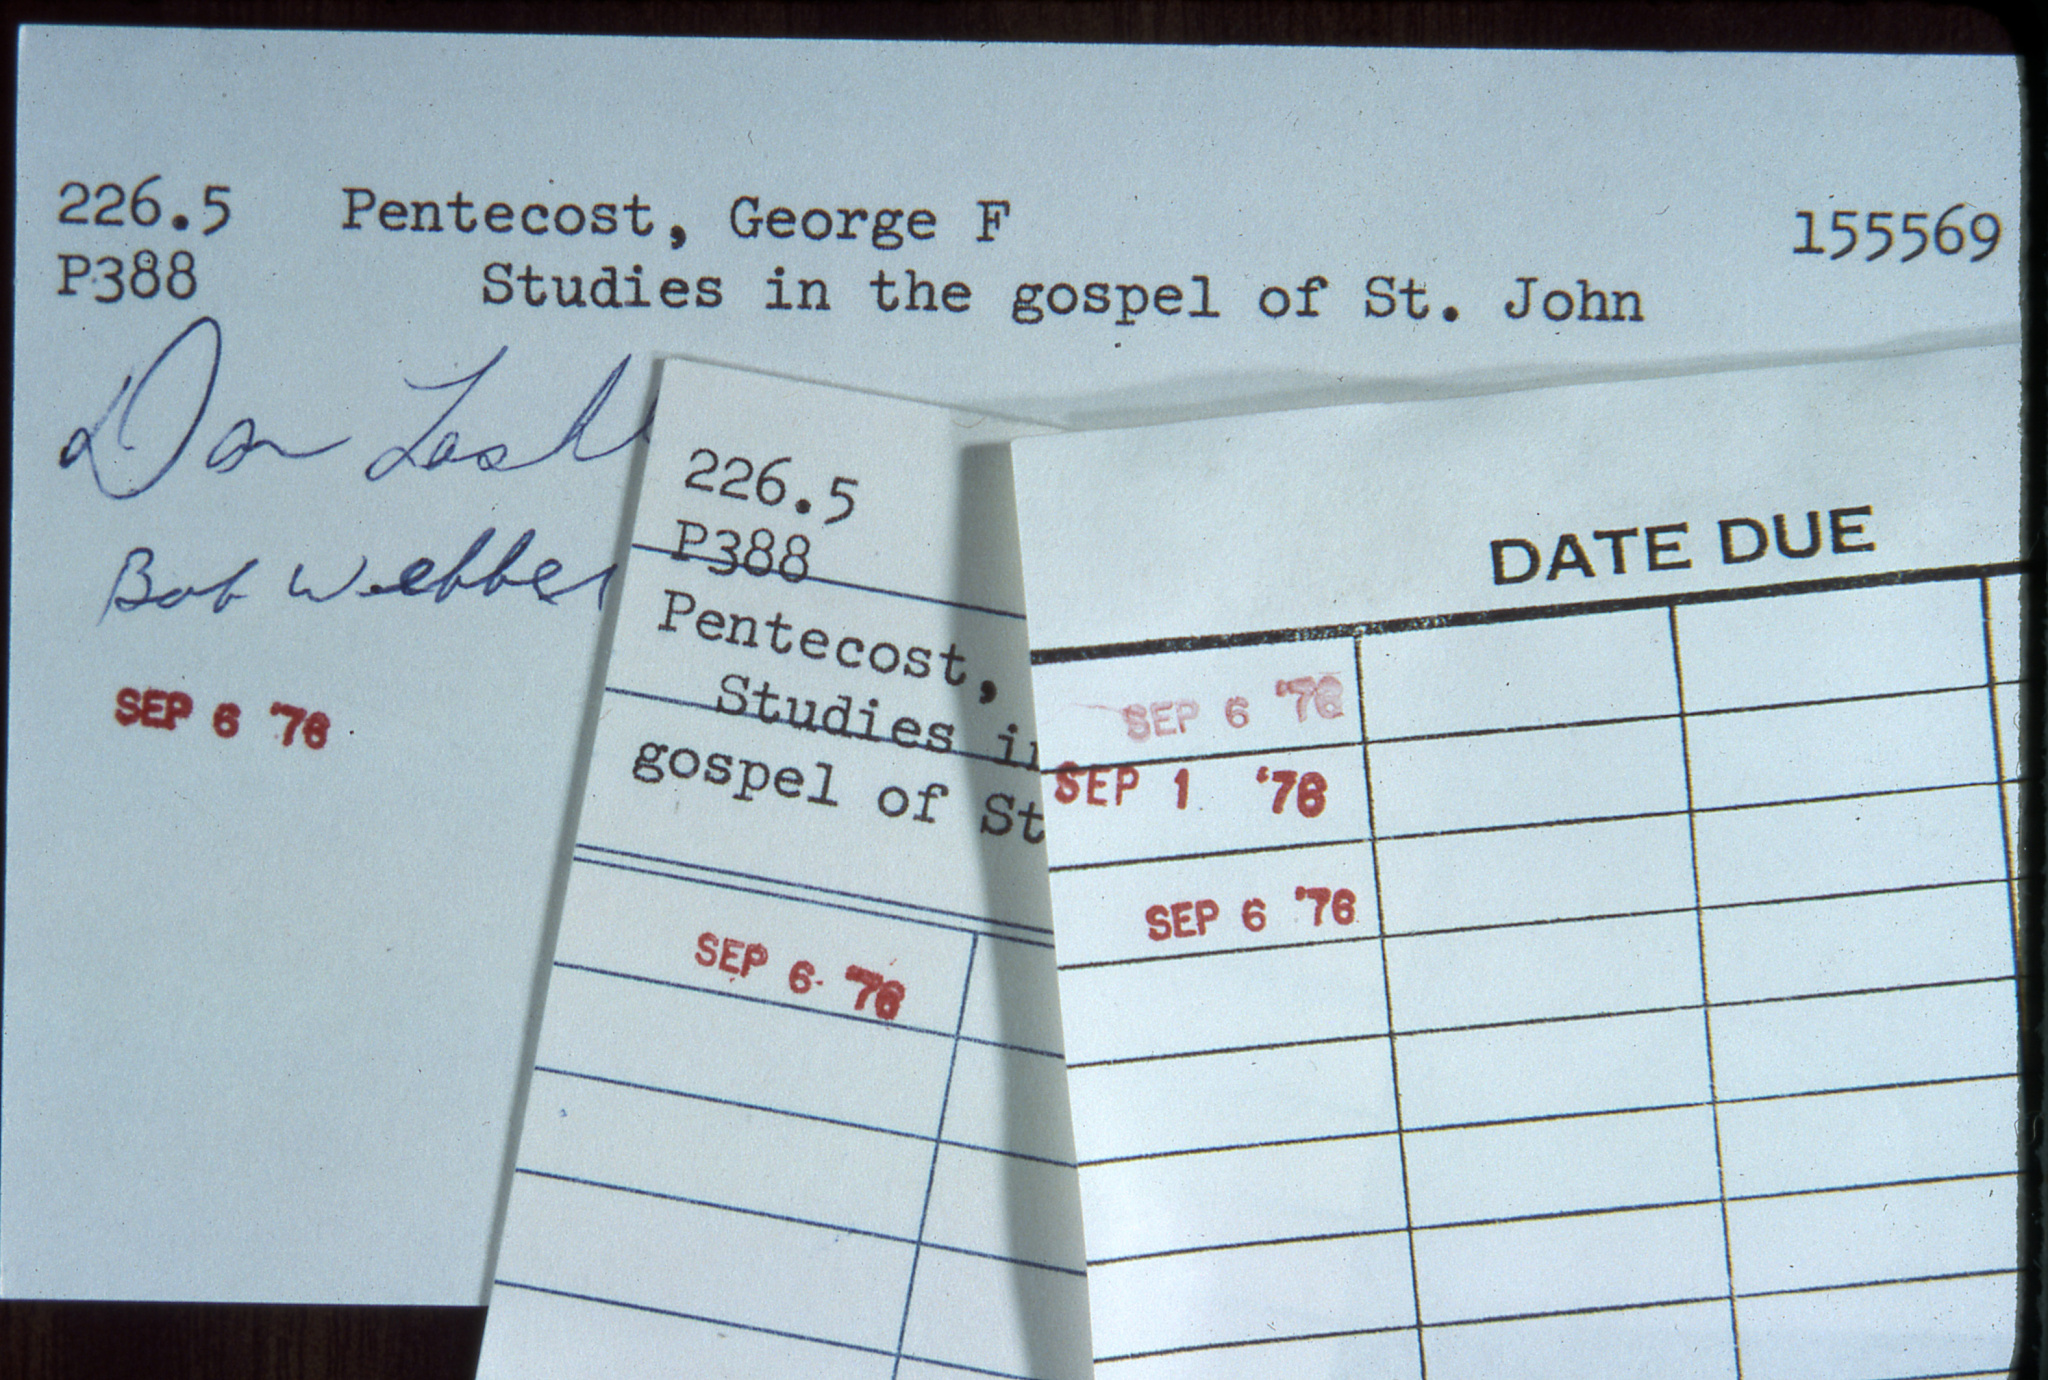 Photo of author, date due and date slip cards, 1976